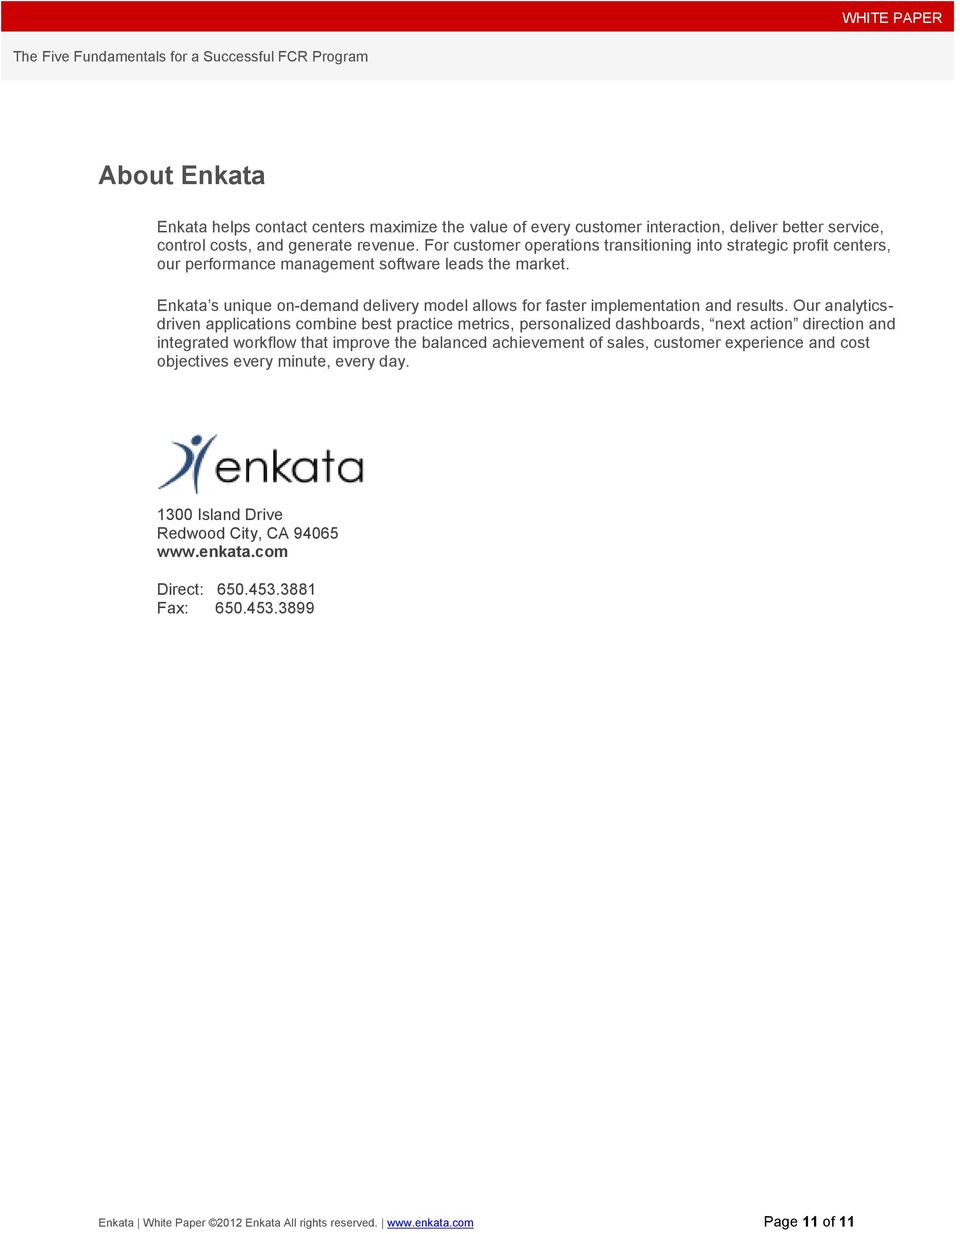 Enkata s unique on-demand delivery model allows for faster implementation and results.